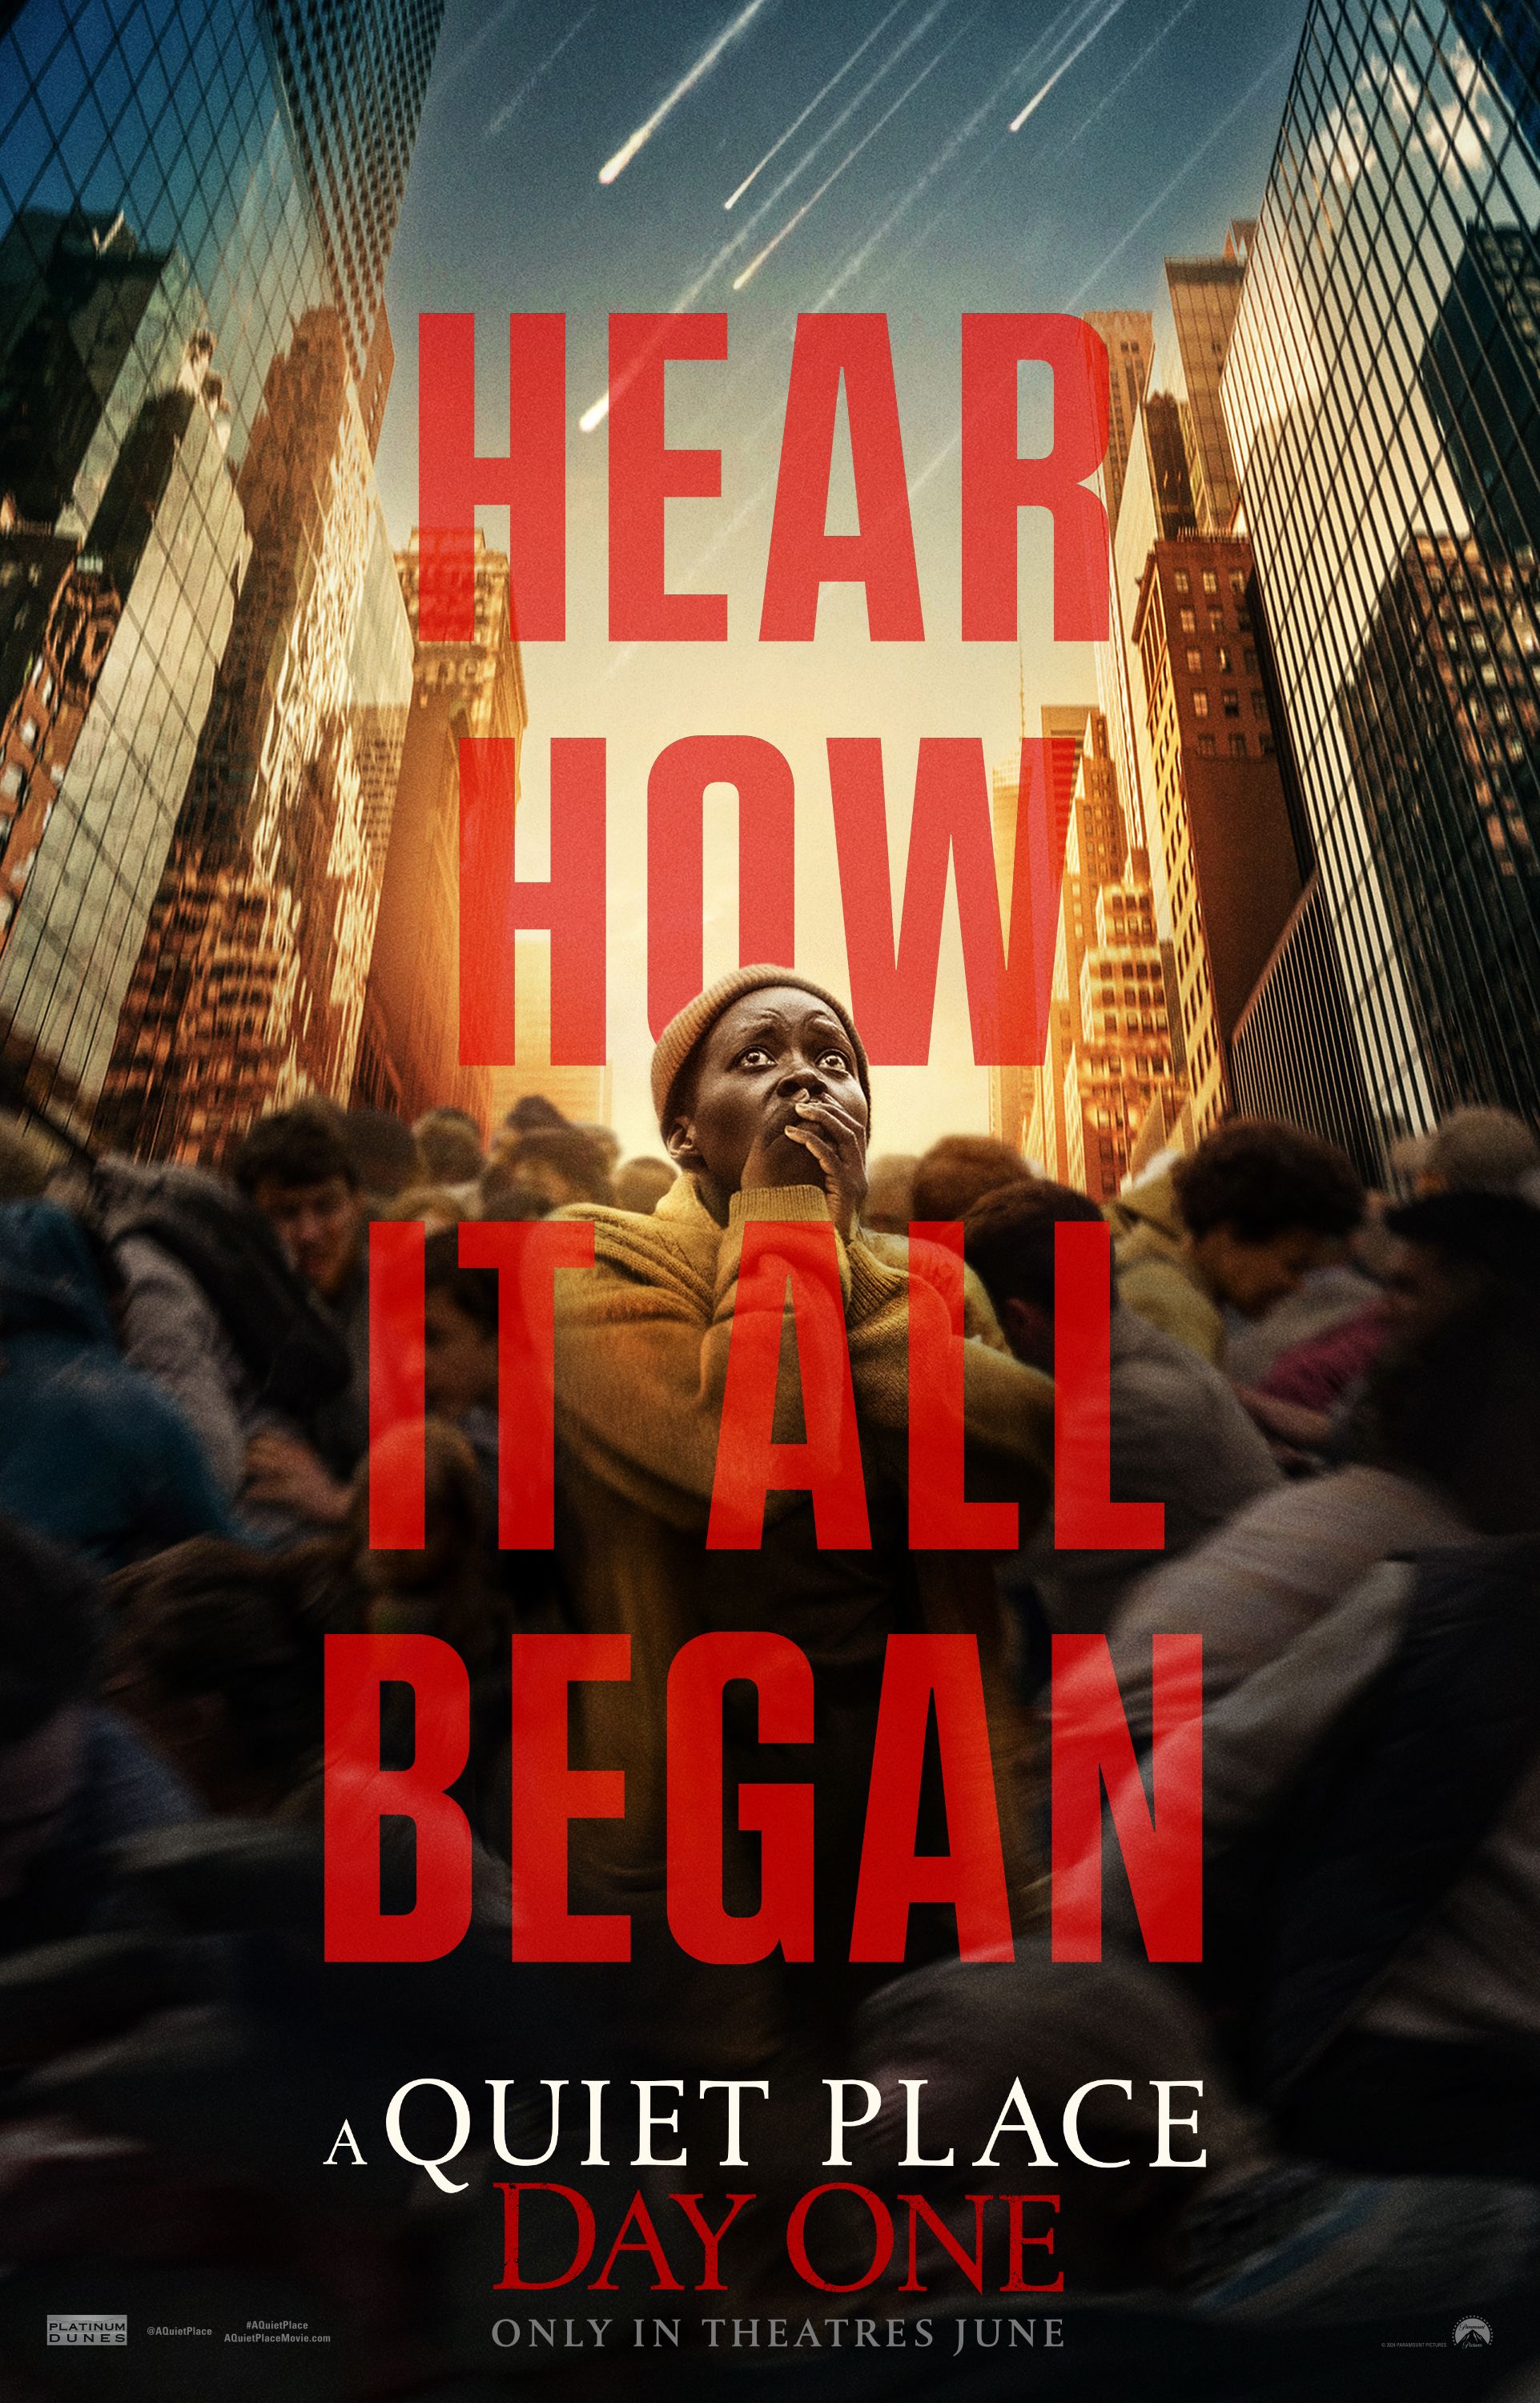 A Quiet Place Day 1 Poster Showing Lupita Nyong'o Covering Her Mouth